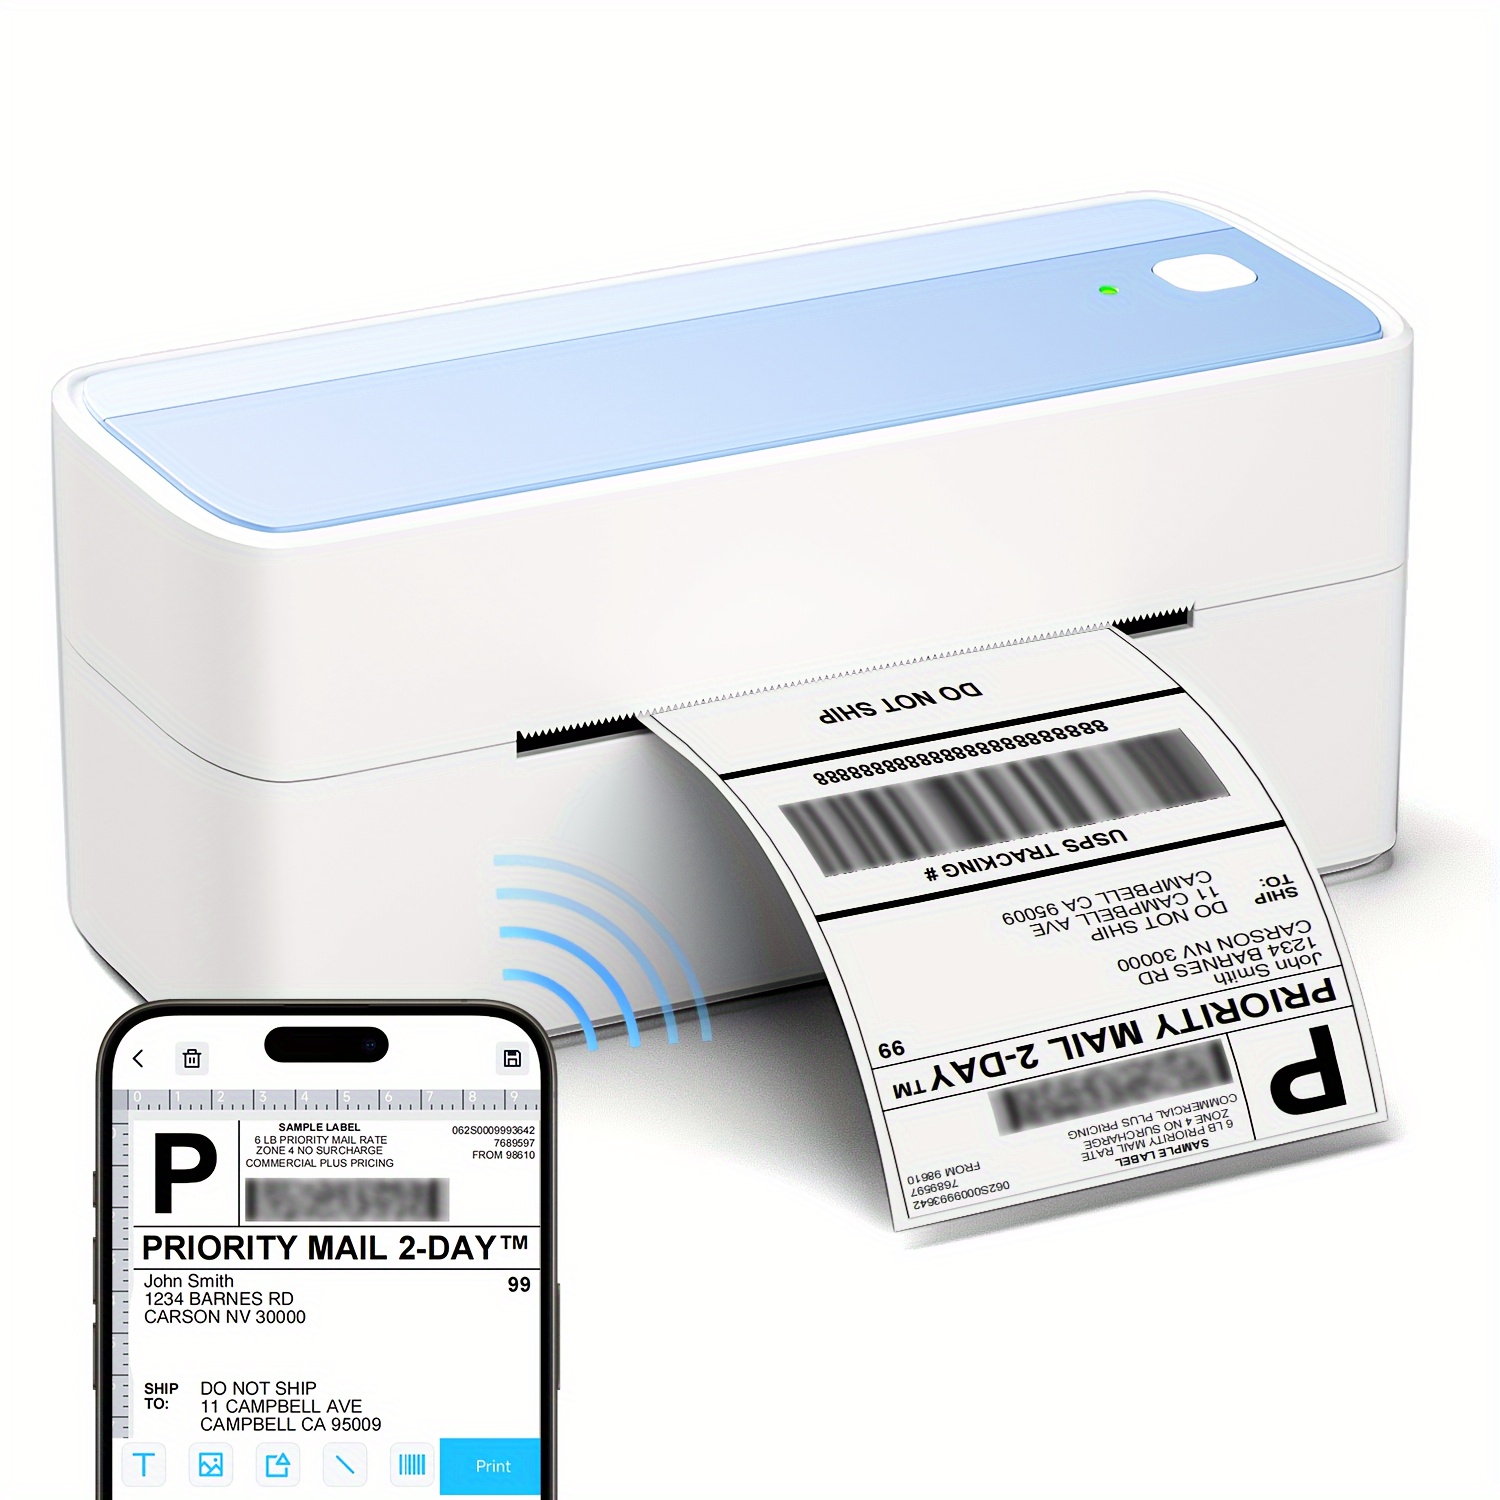 Phomemo Bluetooth Thermal Printer- D520-BT Shipping Label Printer 4x6  Printer for Small Business & Packages/Barcode/Address/Postage Label,  Compatible